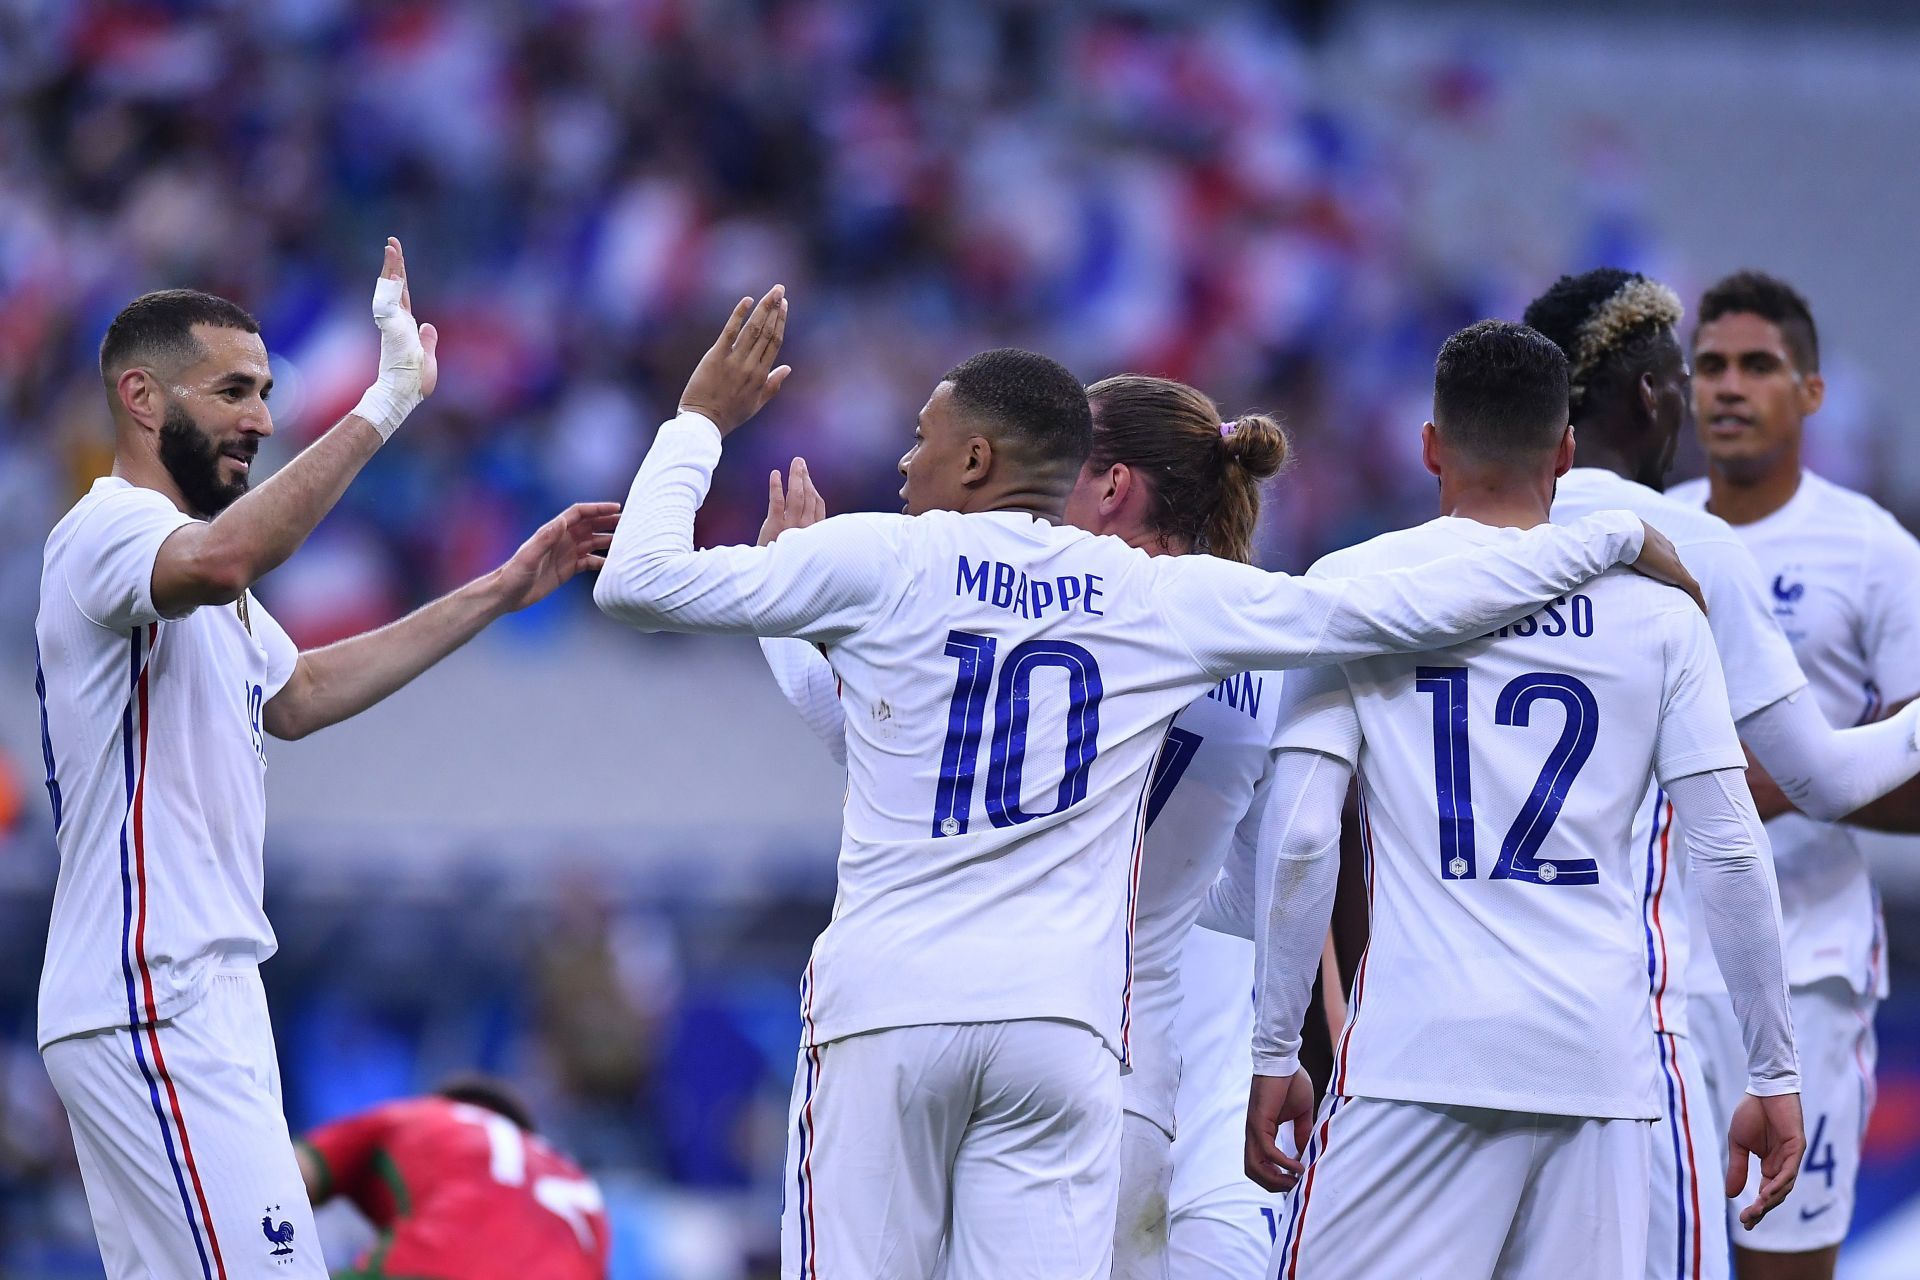 French footballer Kylian Mbappe celebrates with his teammates in a match